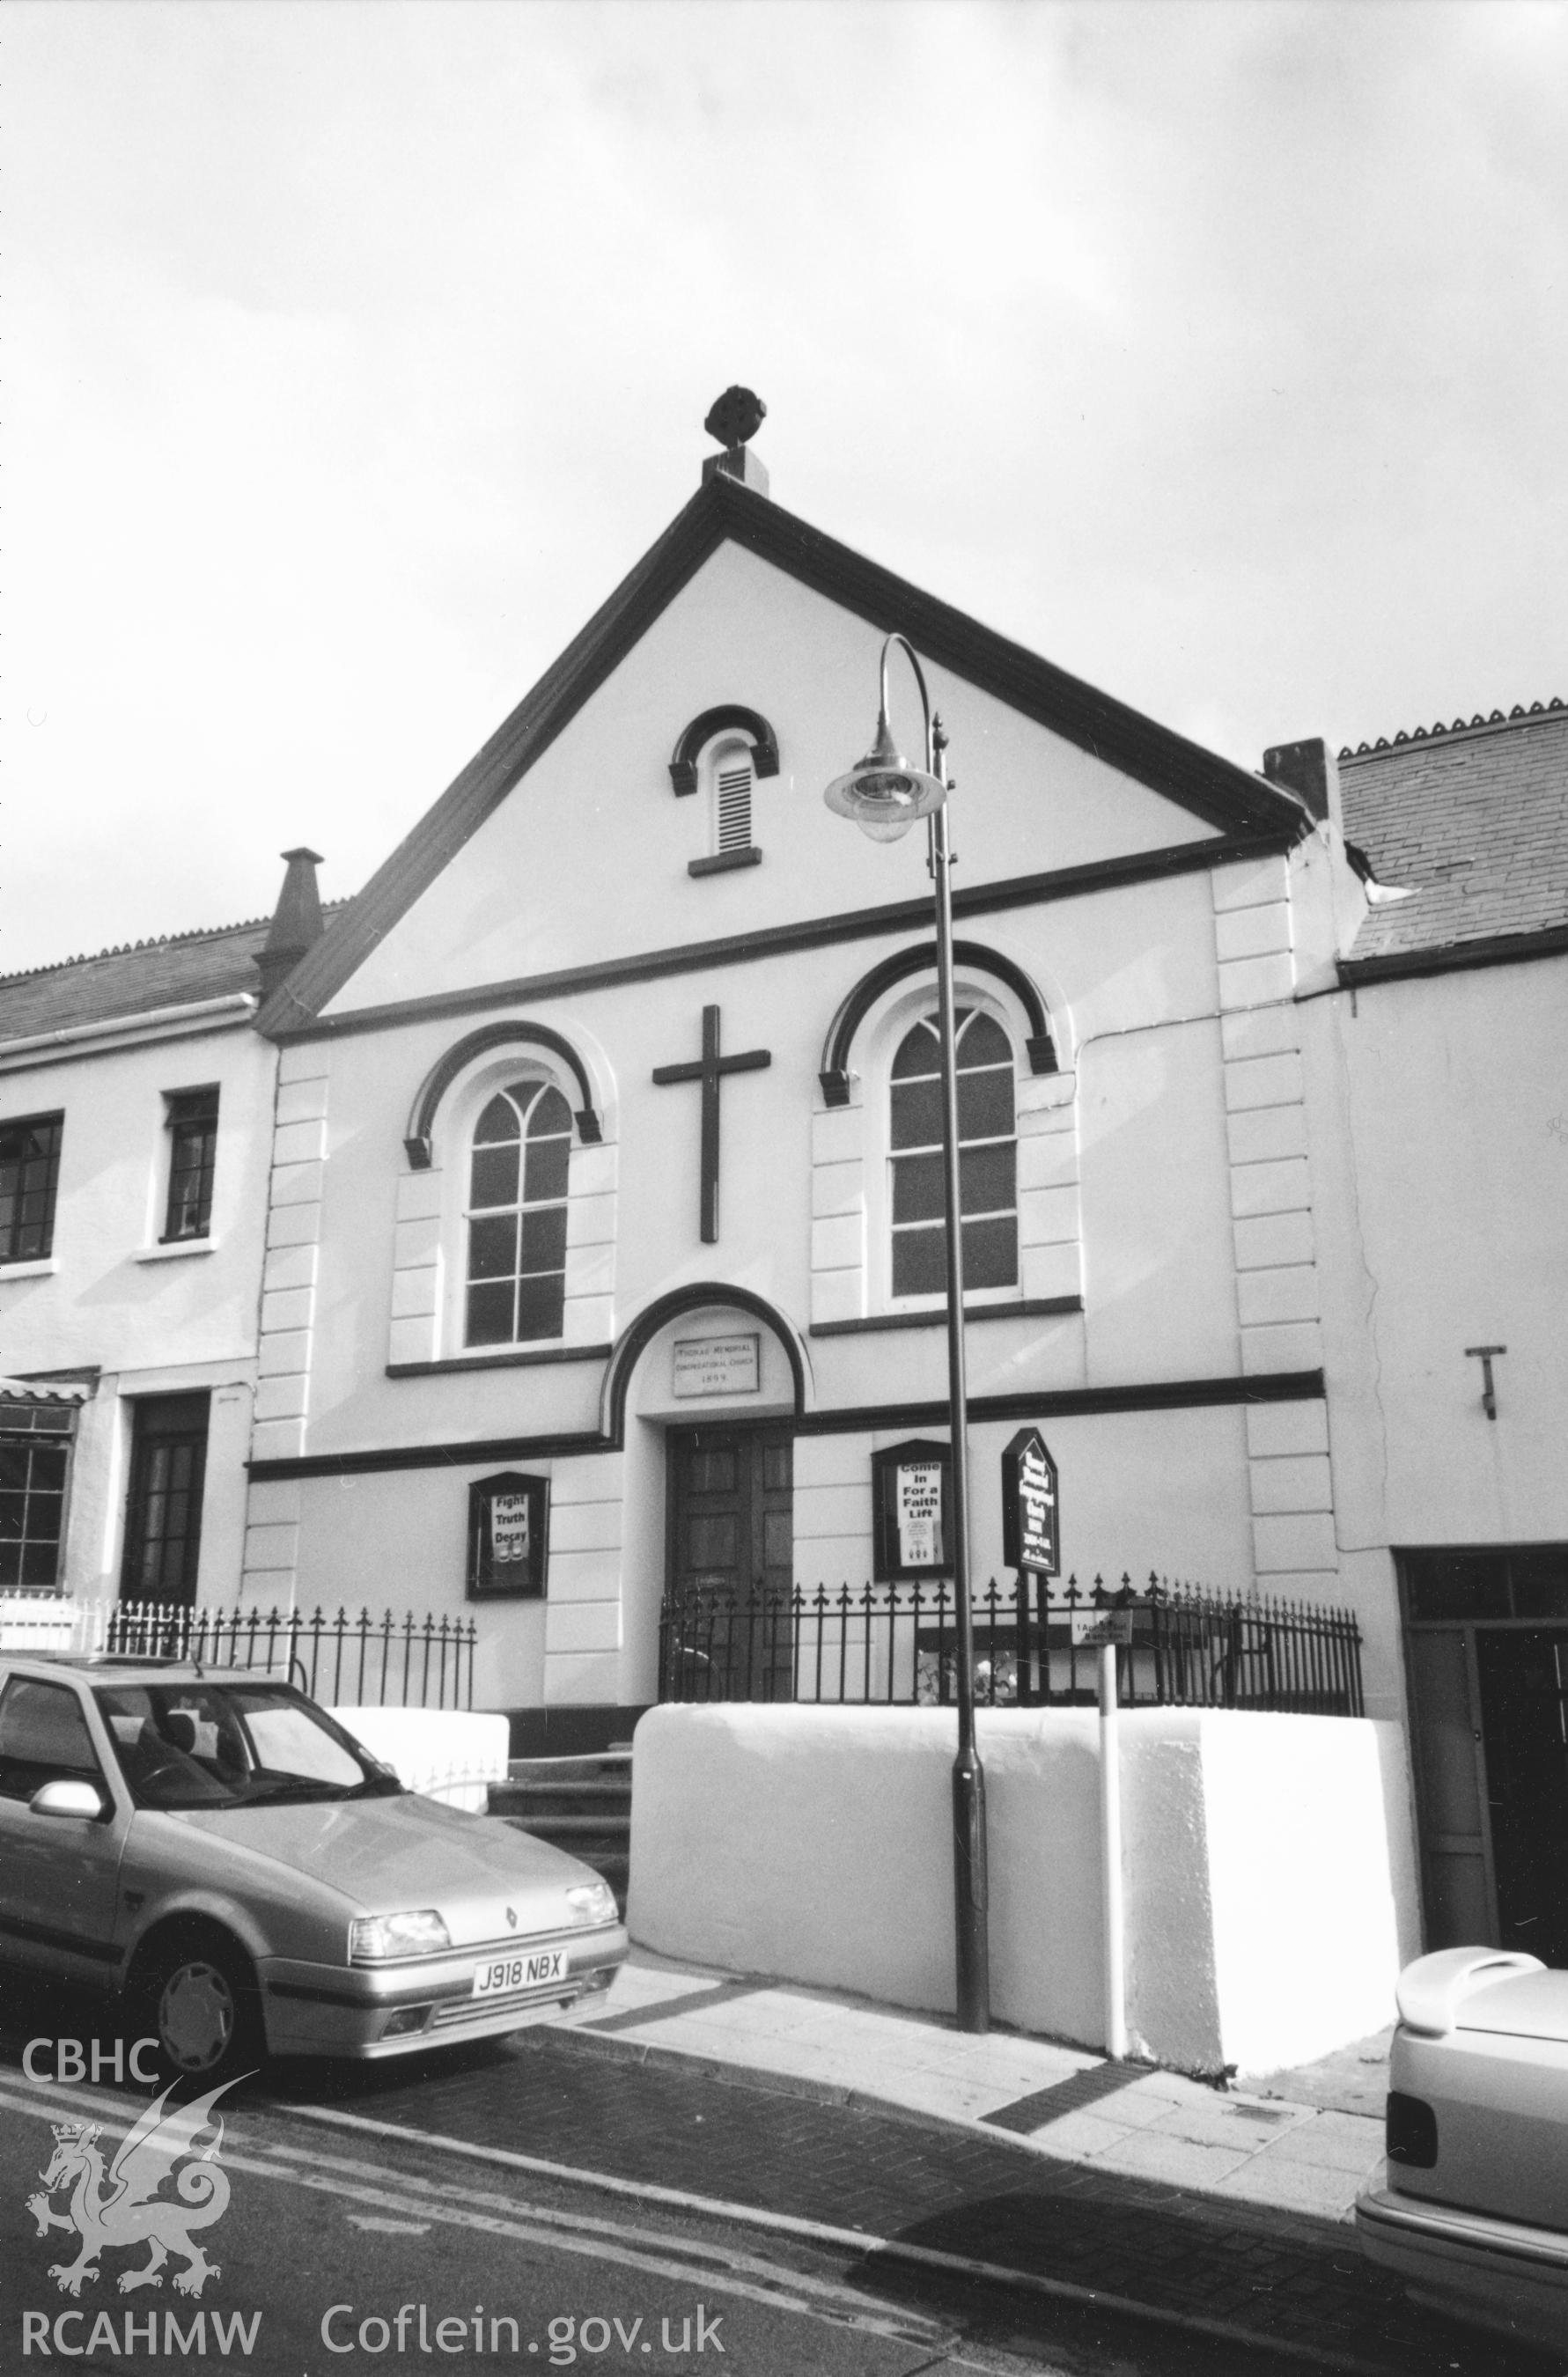 Digital copy of a black and white photograph showing an exterior view of Thomas Memorial Congregational Chapel, Saundersfoot taken by Robert Scourfield, 1996.